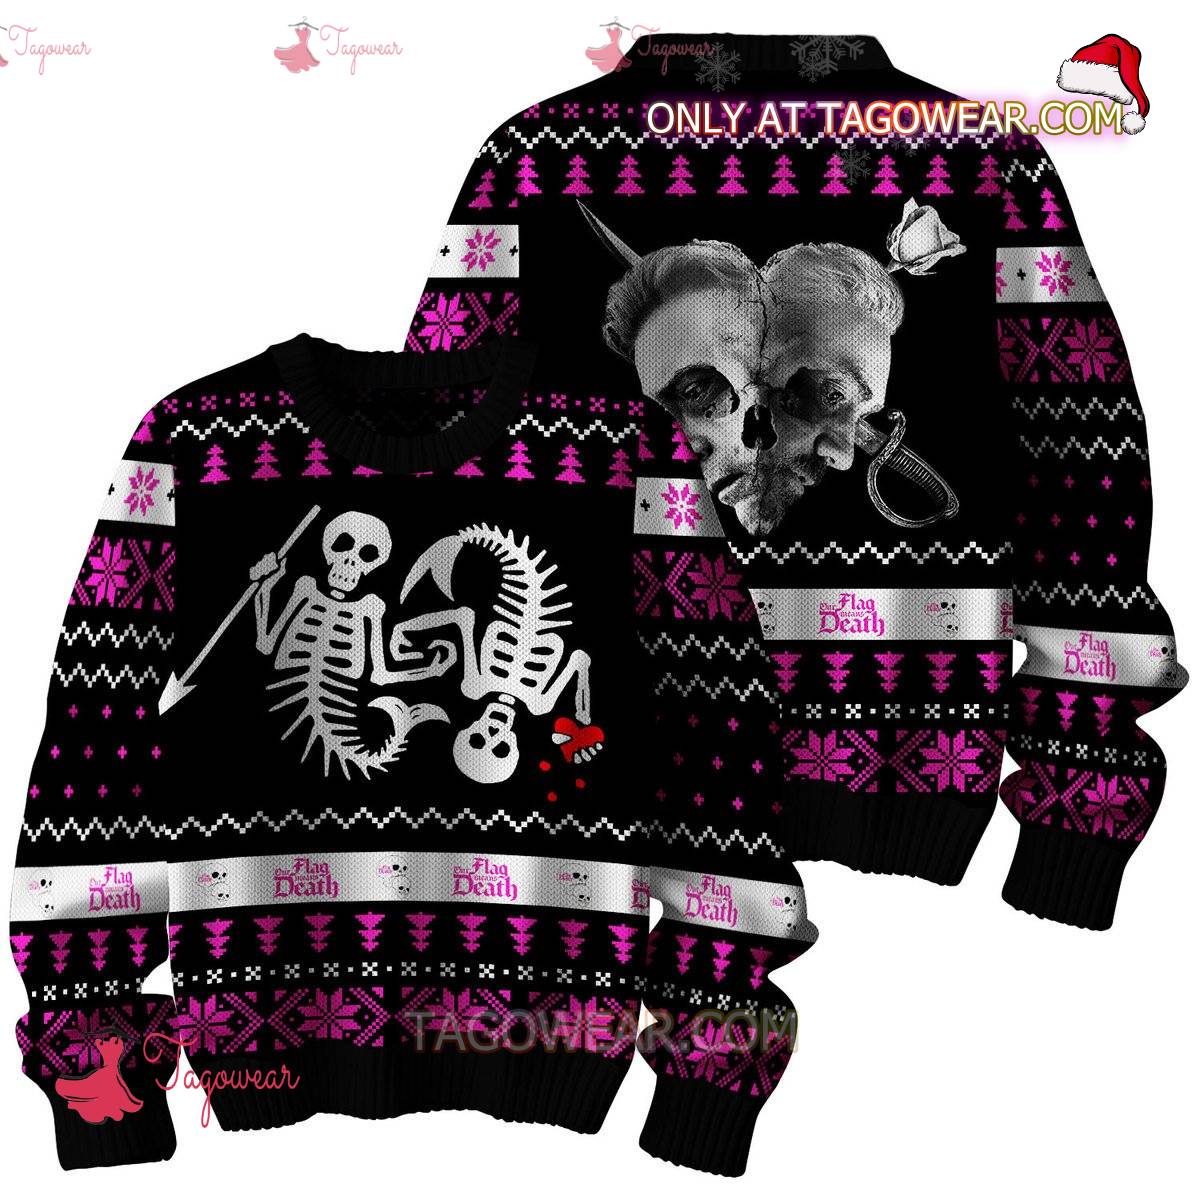 Our Flag Means Death Skull Ugly Christmas Sweater